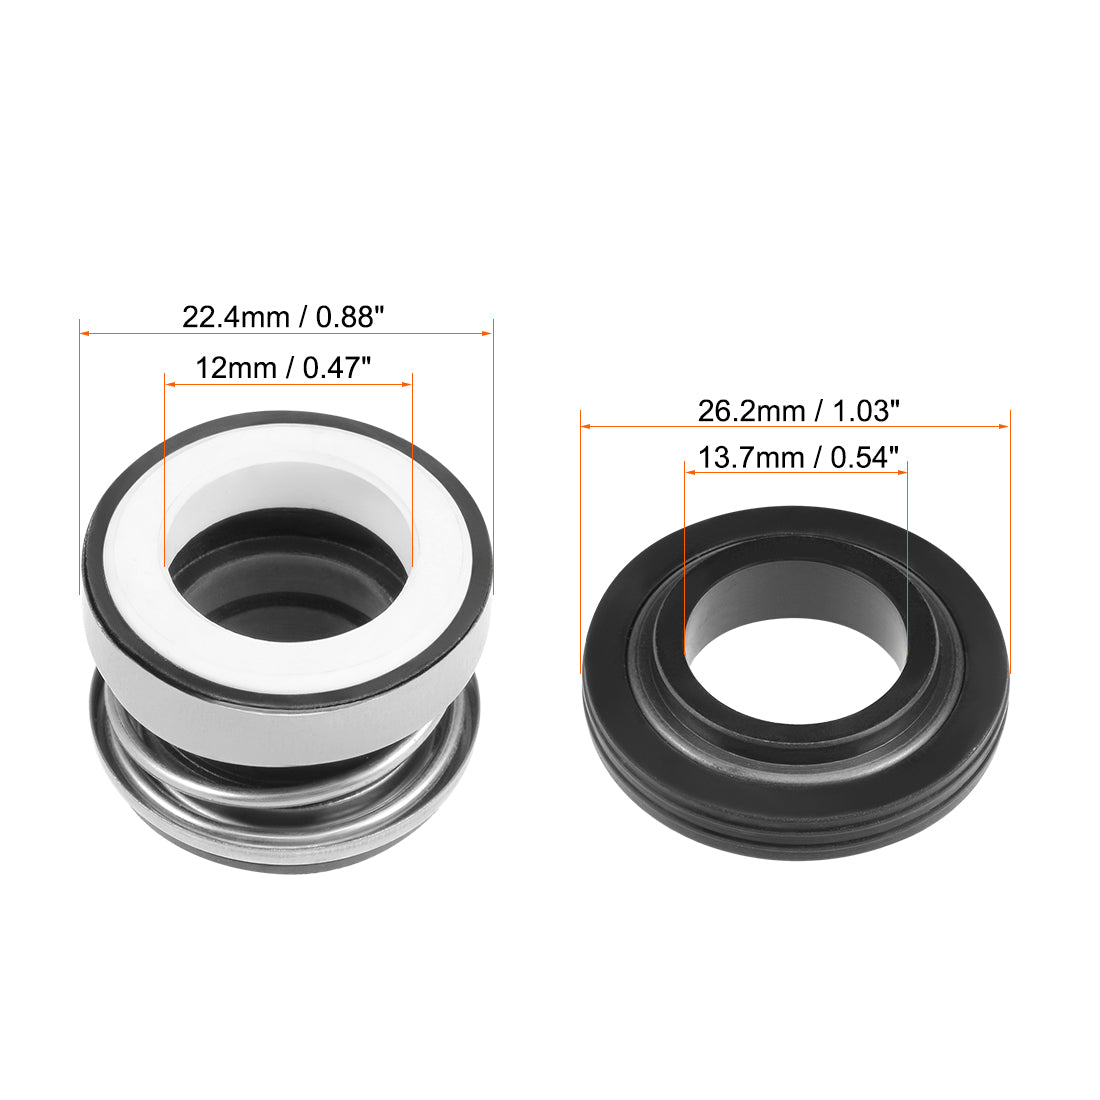 uxcell Uxcell Mechanical Shaft Seal Replacement for Pool Spa Pump 3pcs 103-12